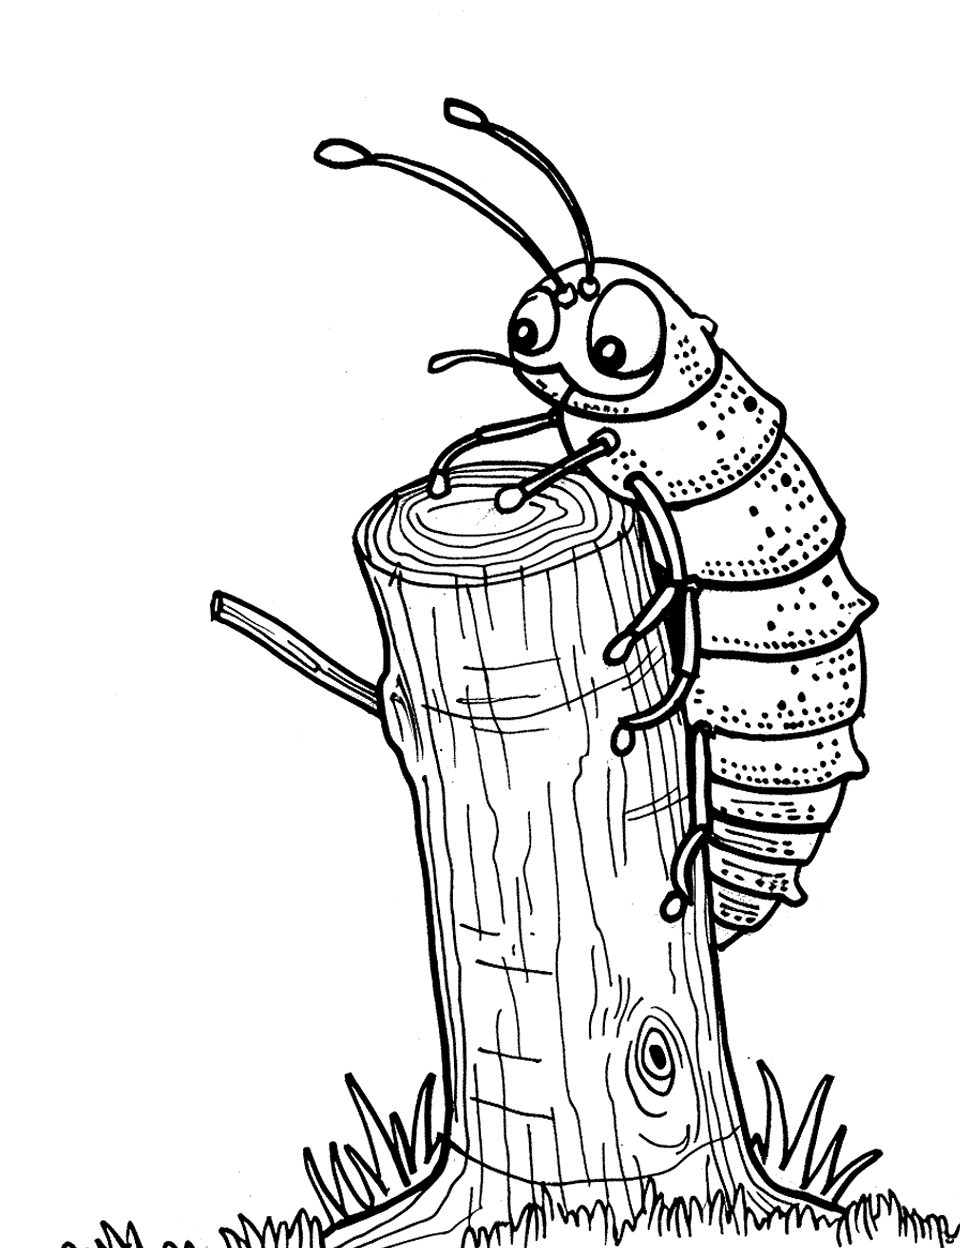 Caterpillar on a Tree Trunk Insect Coloring Page - A caterpillar inching its way up a tree trunk.